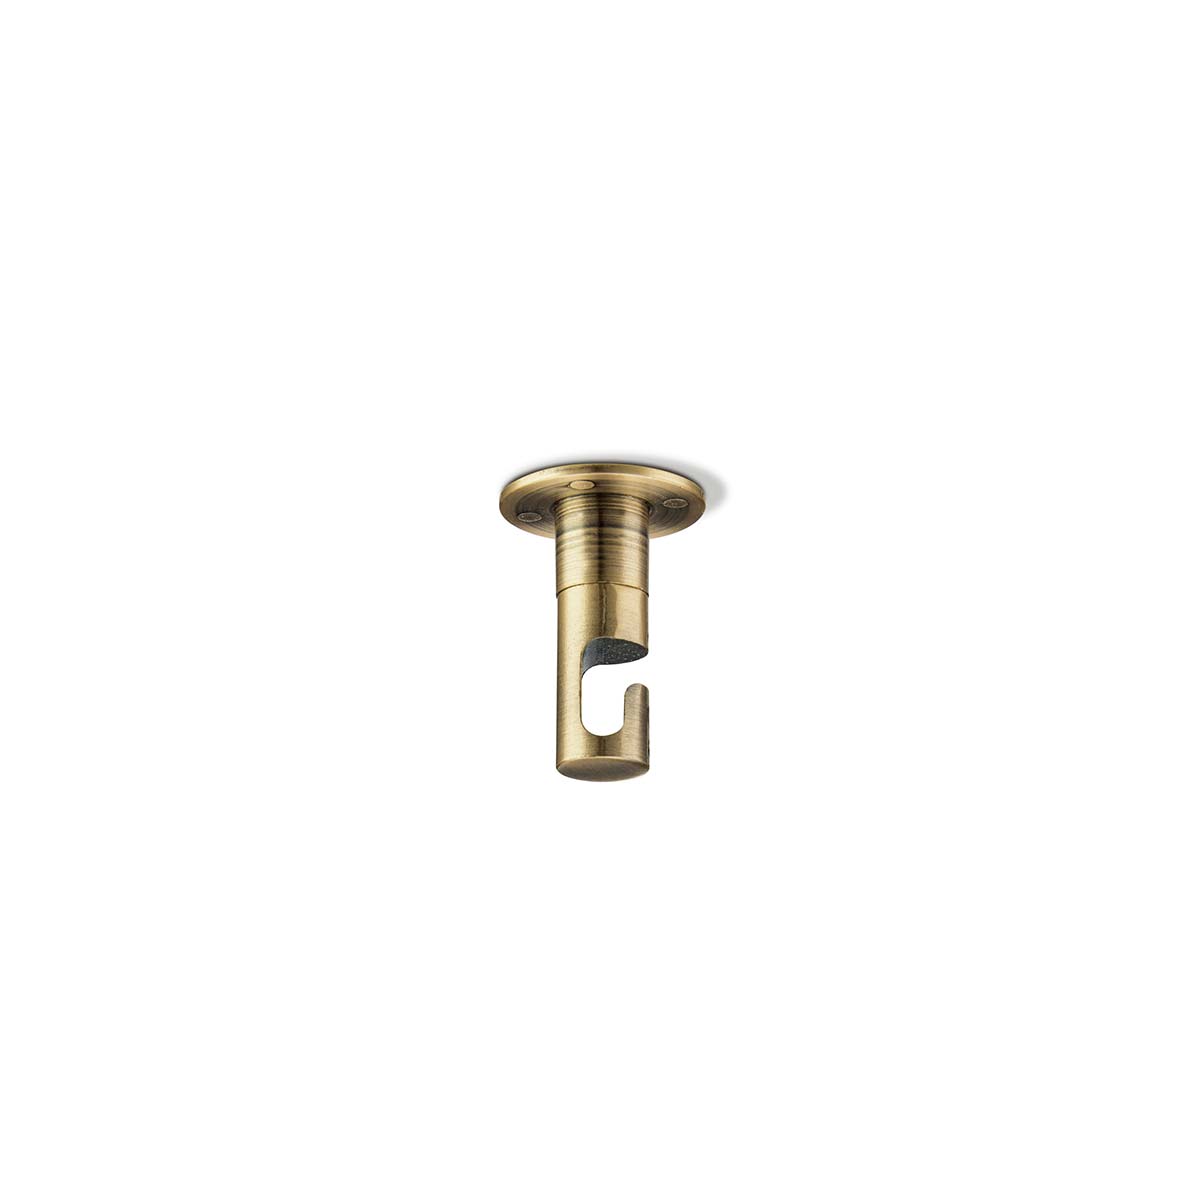 Tangla lighting - TLHG002BS - Metal cable hanger - mix and match - brass